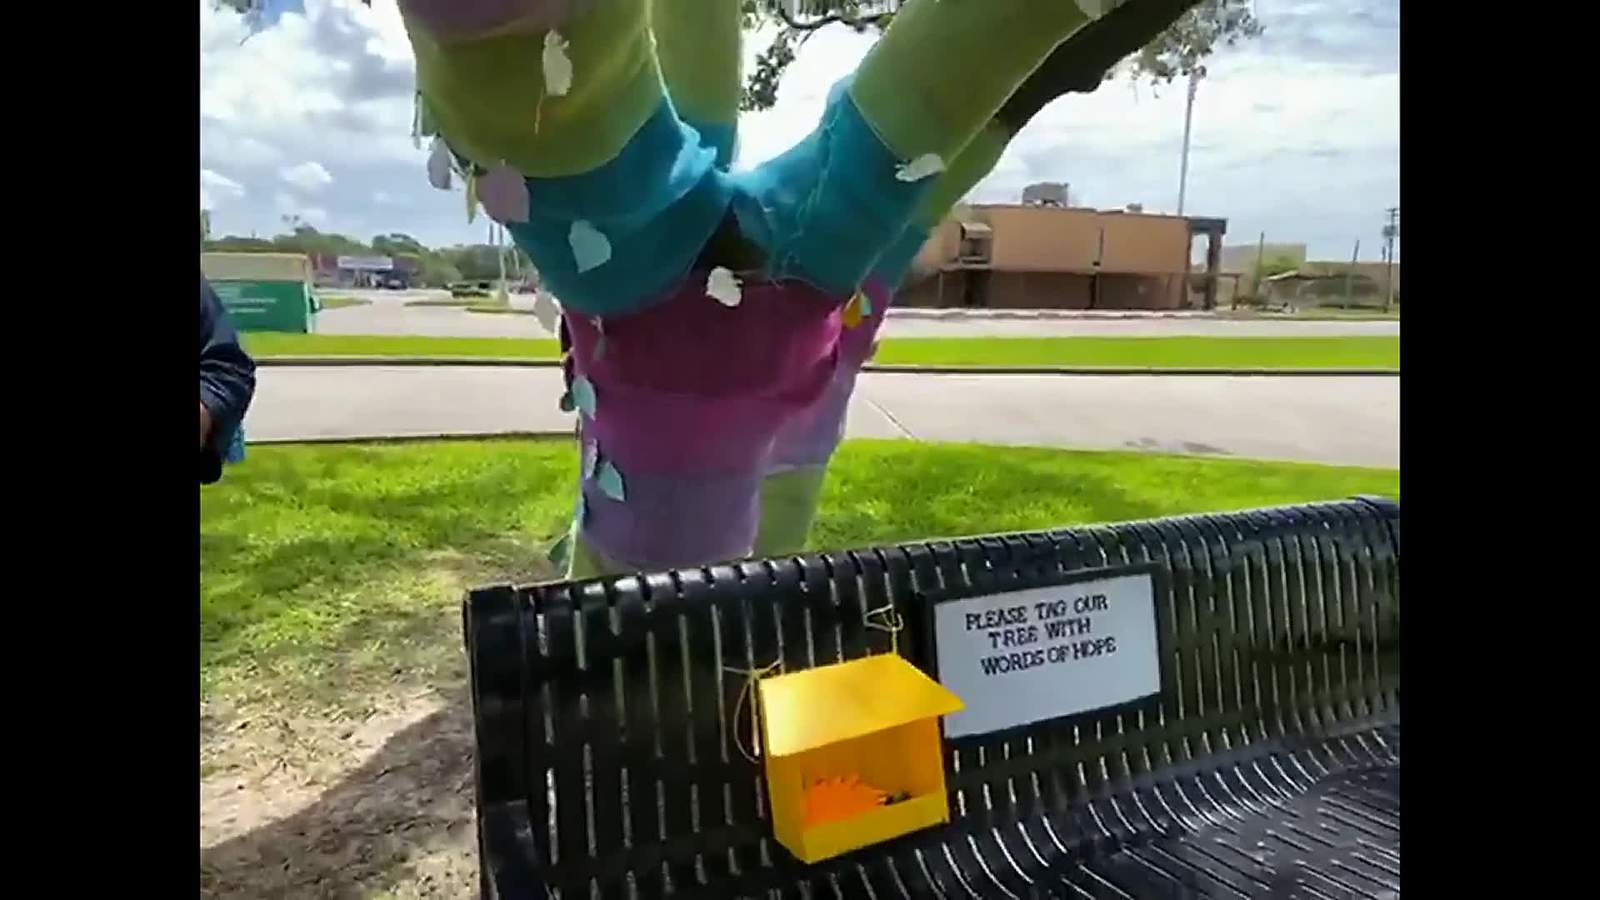 Sterling Municipal Library’s Hope Tree - Spreading encouragement during social distancing - VOD